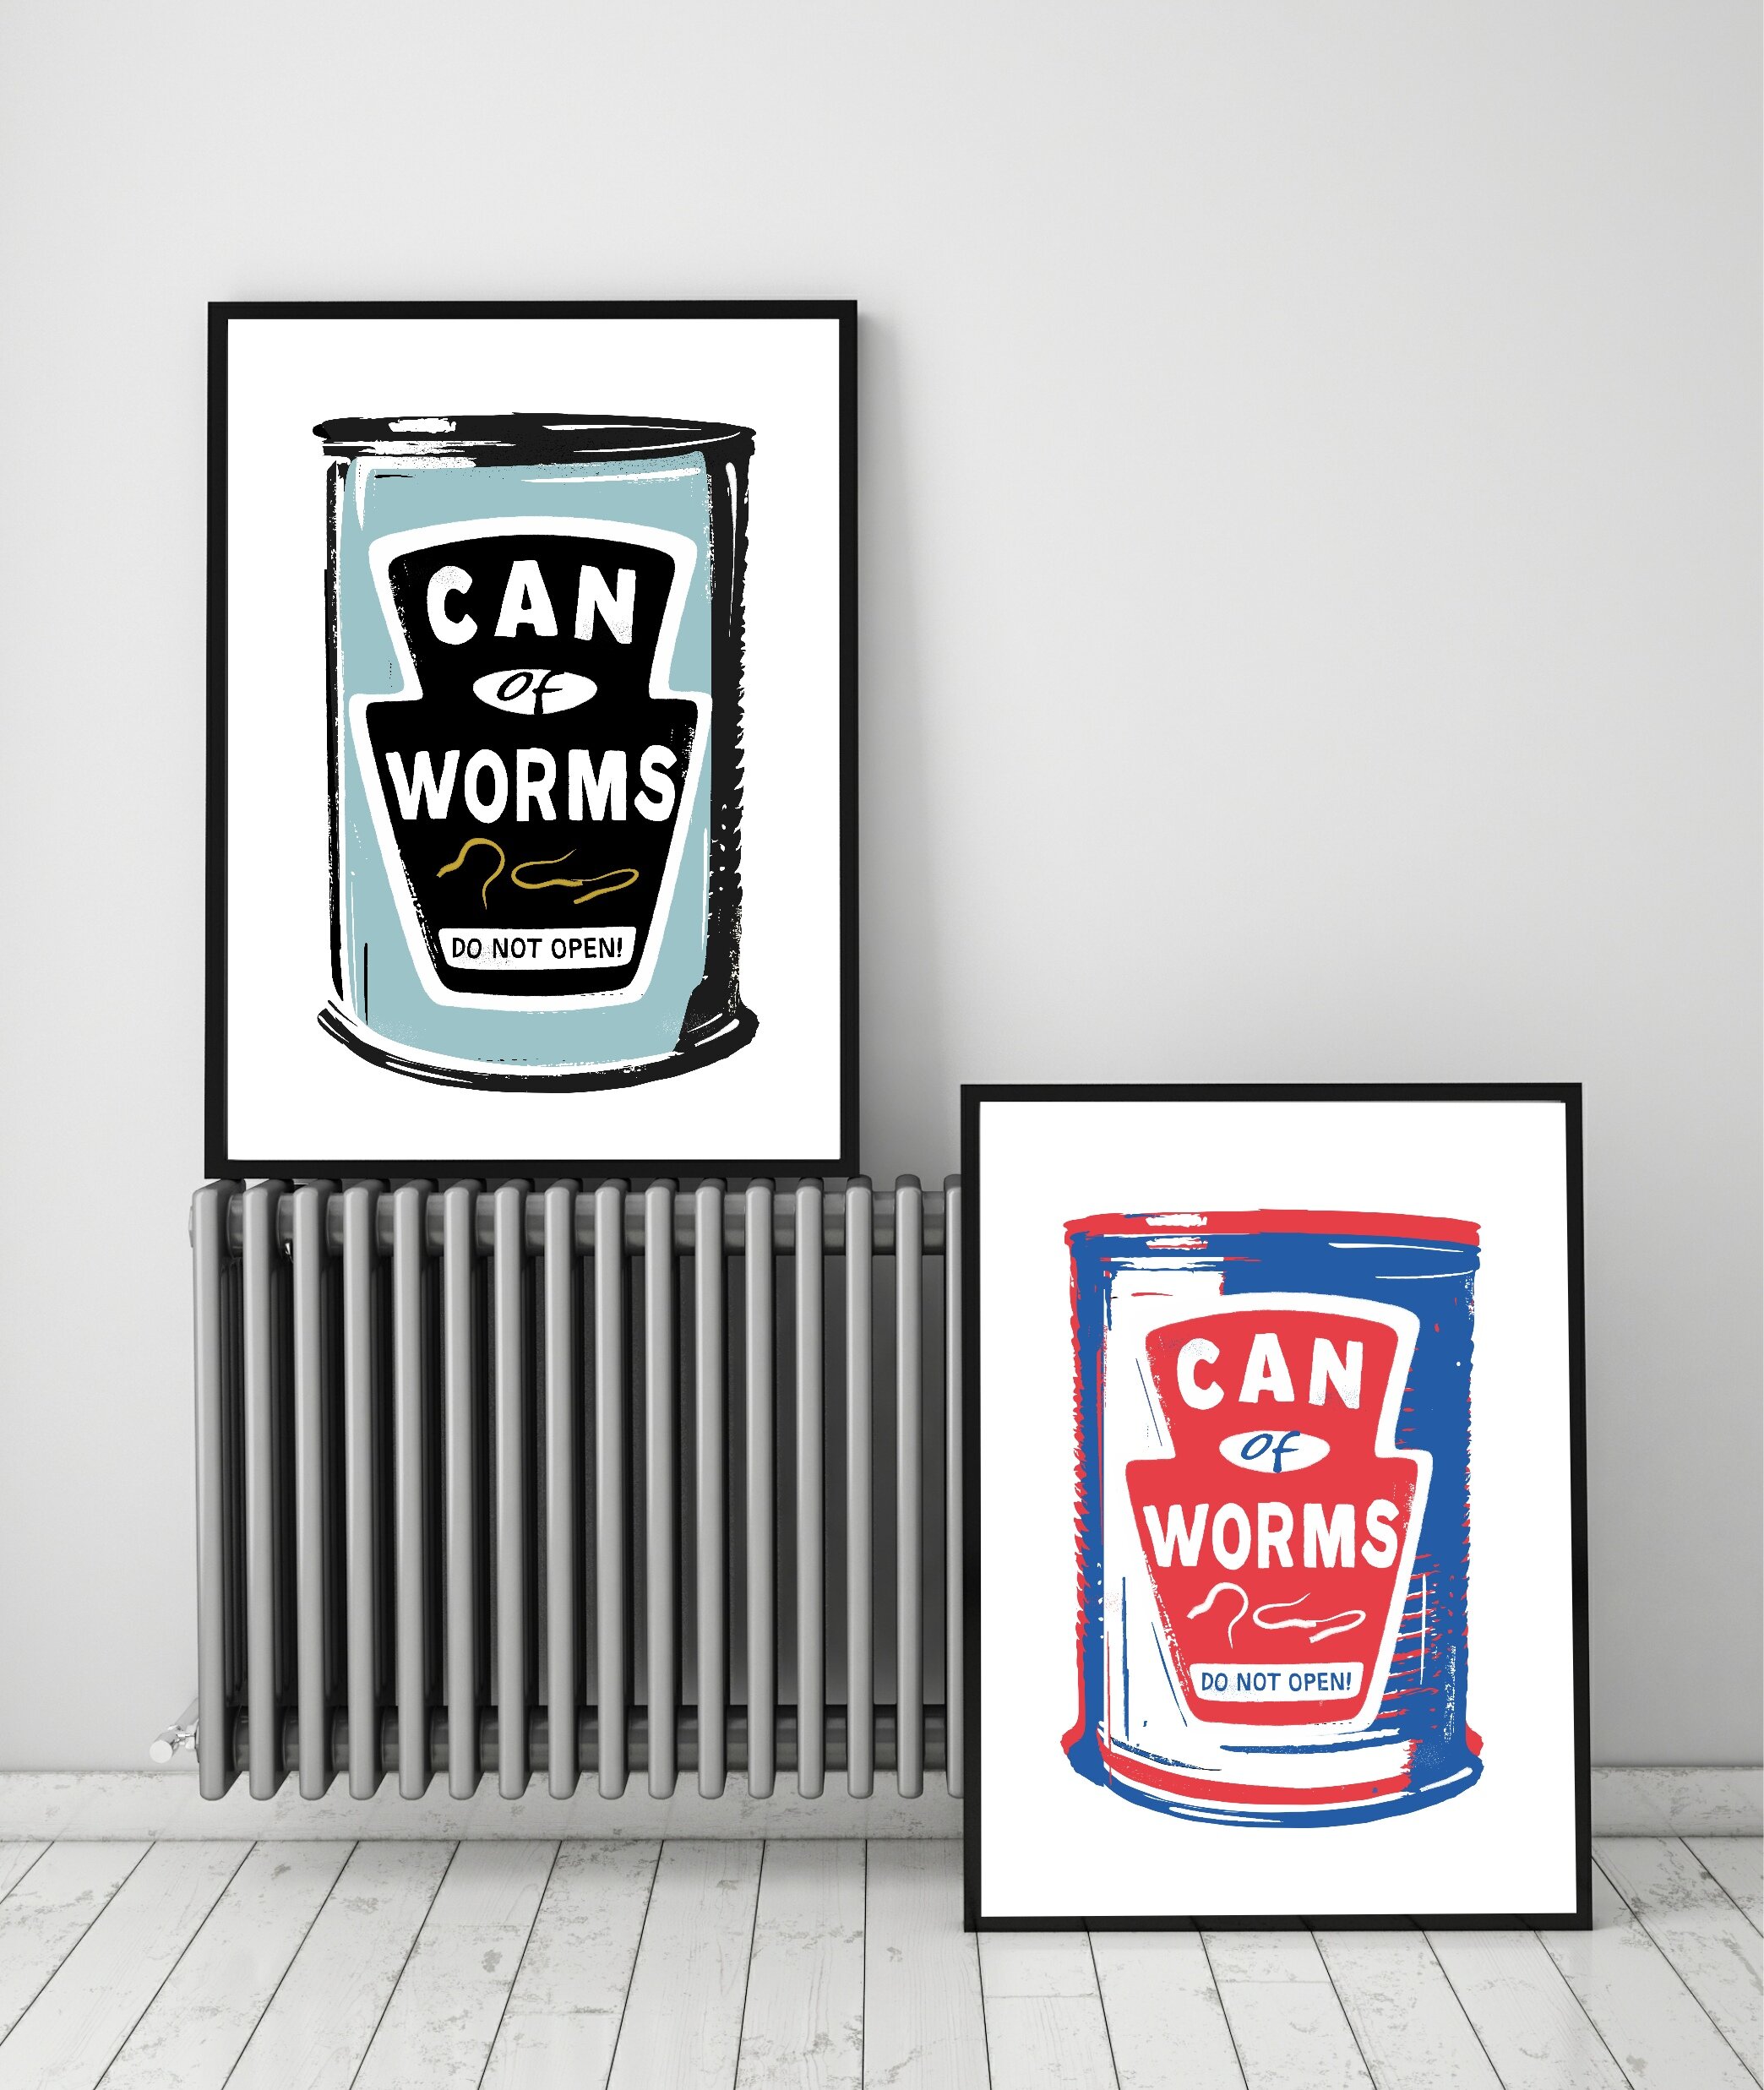 Can of worms art print